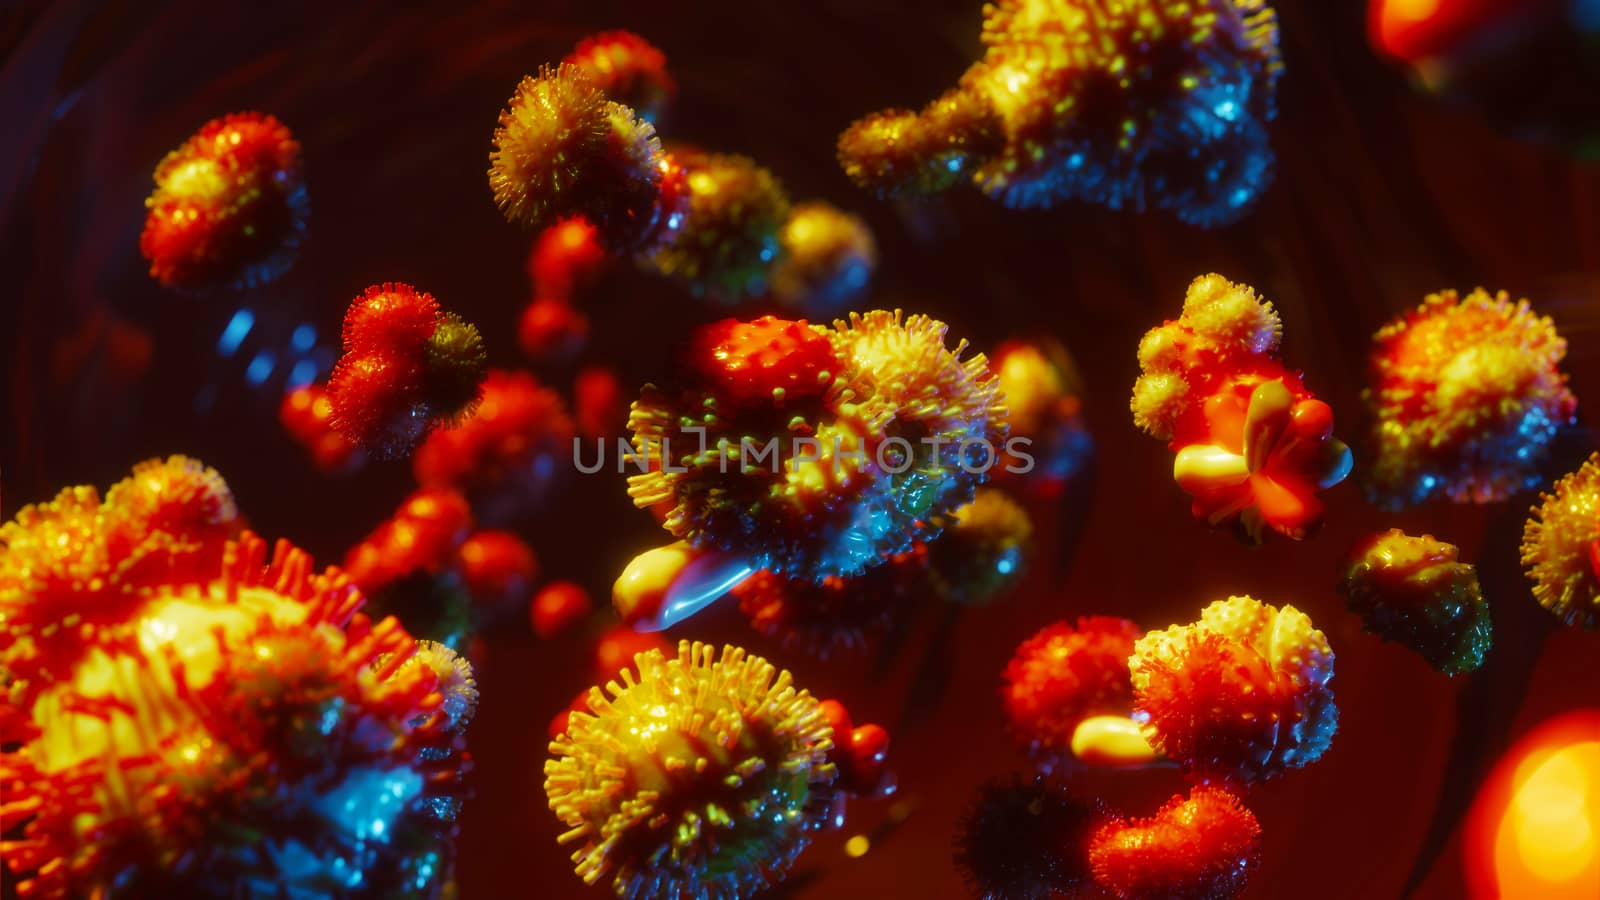 Macro of many bacterias or viruses next to each other by DCStudio